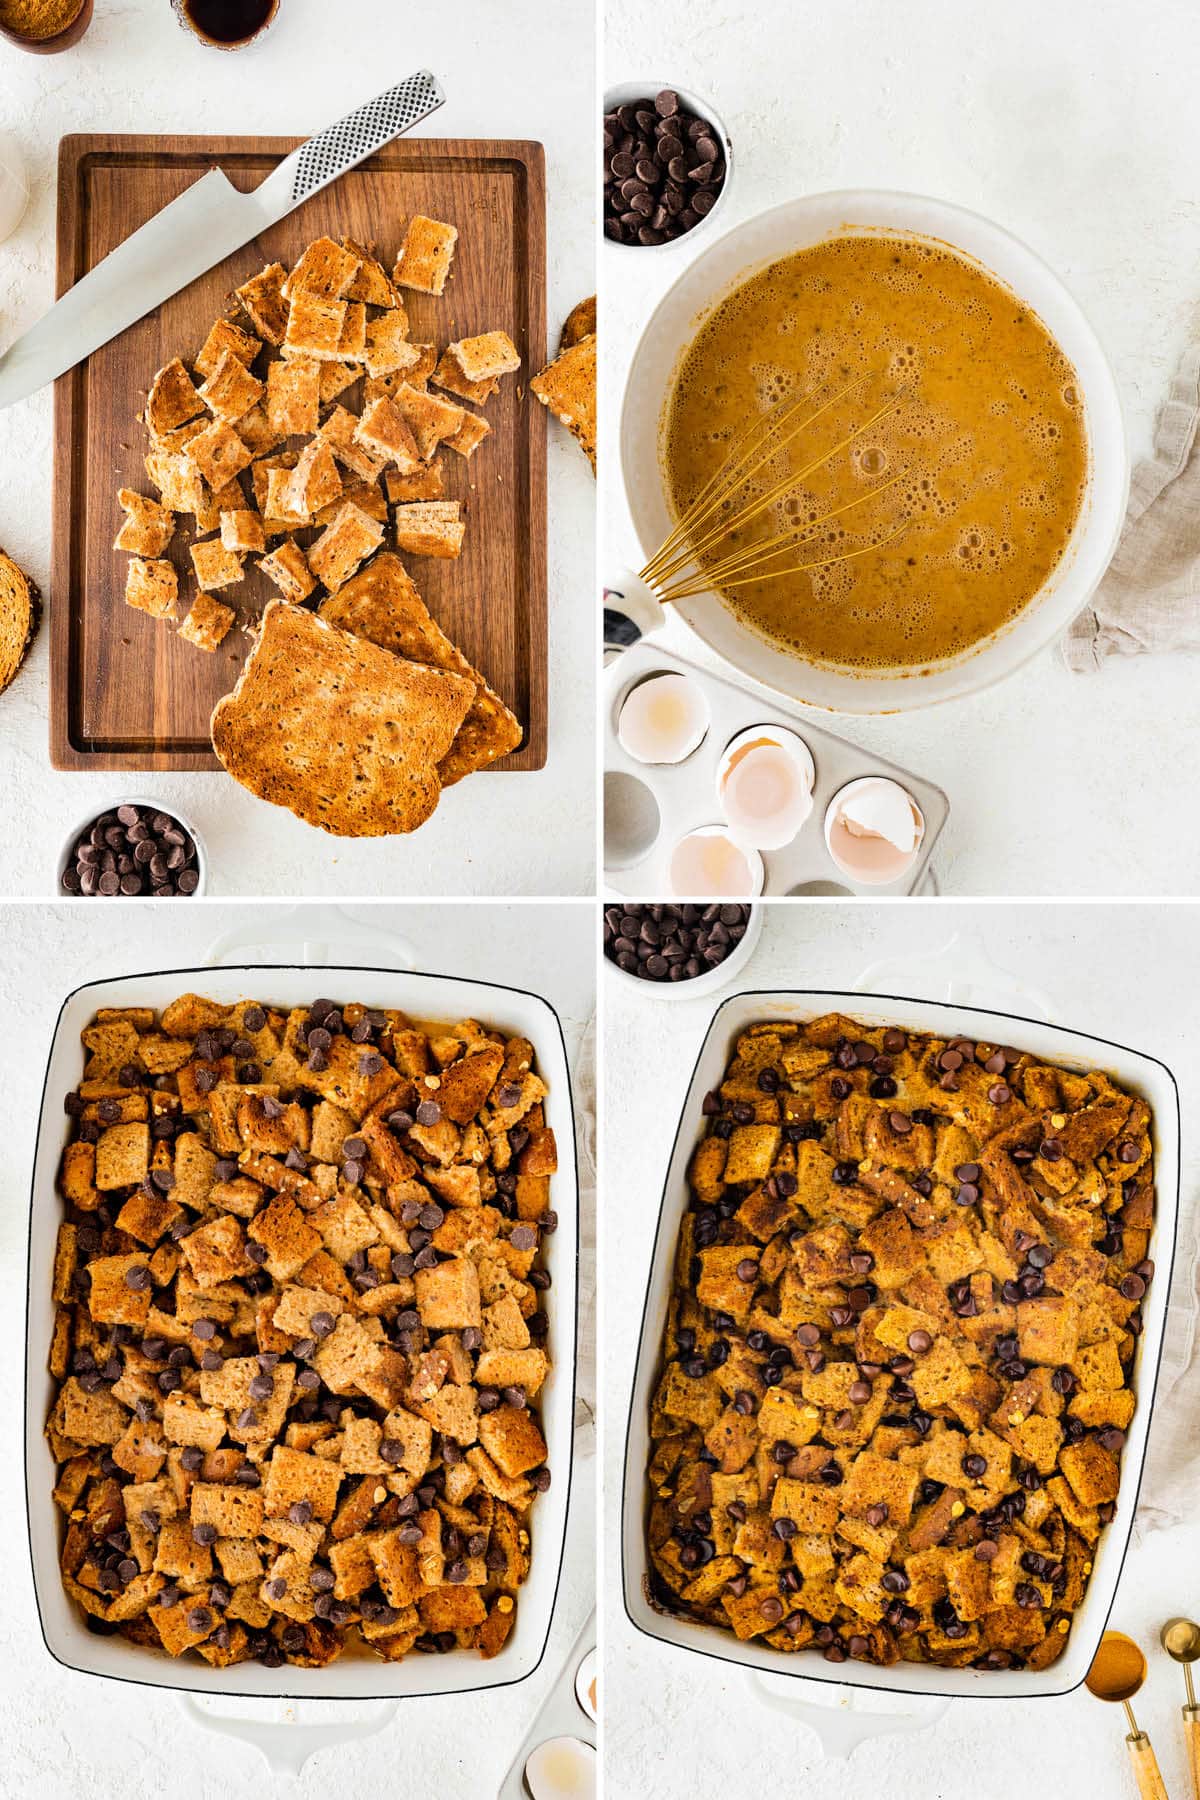 Collage of four photos showing the steps to make Pumpkin French Toast Casserole: cutting up slices of bread, whisking the pumpkin egg mixture, adding bread and egg mixture to a baking dish and then baking with chocolate chips on top.